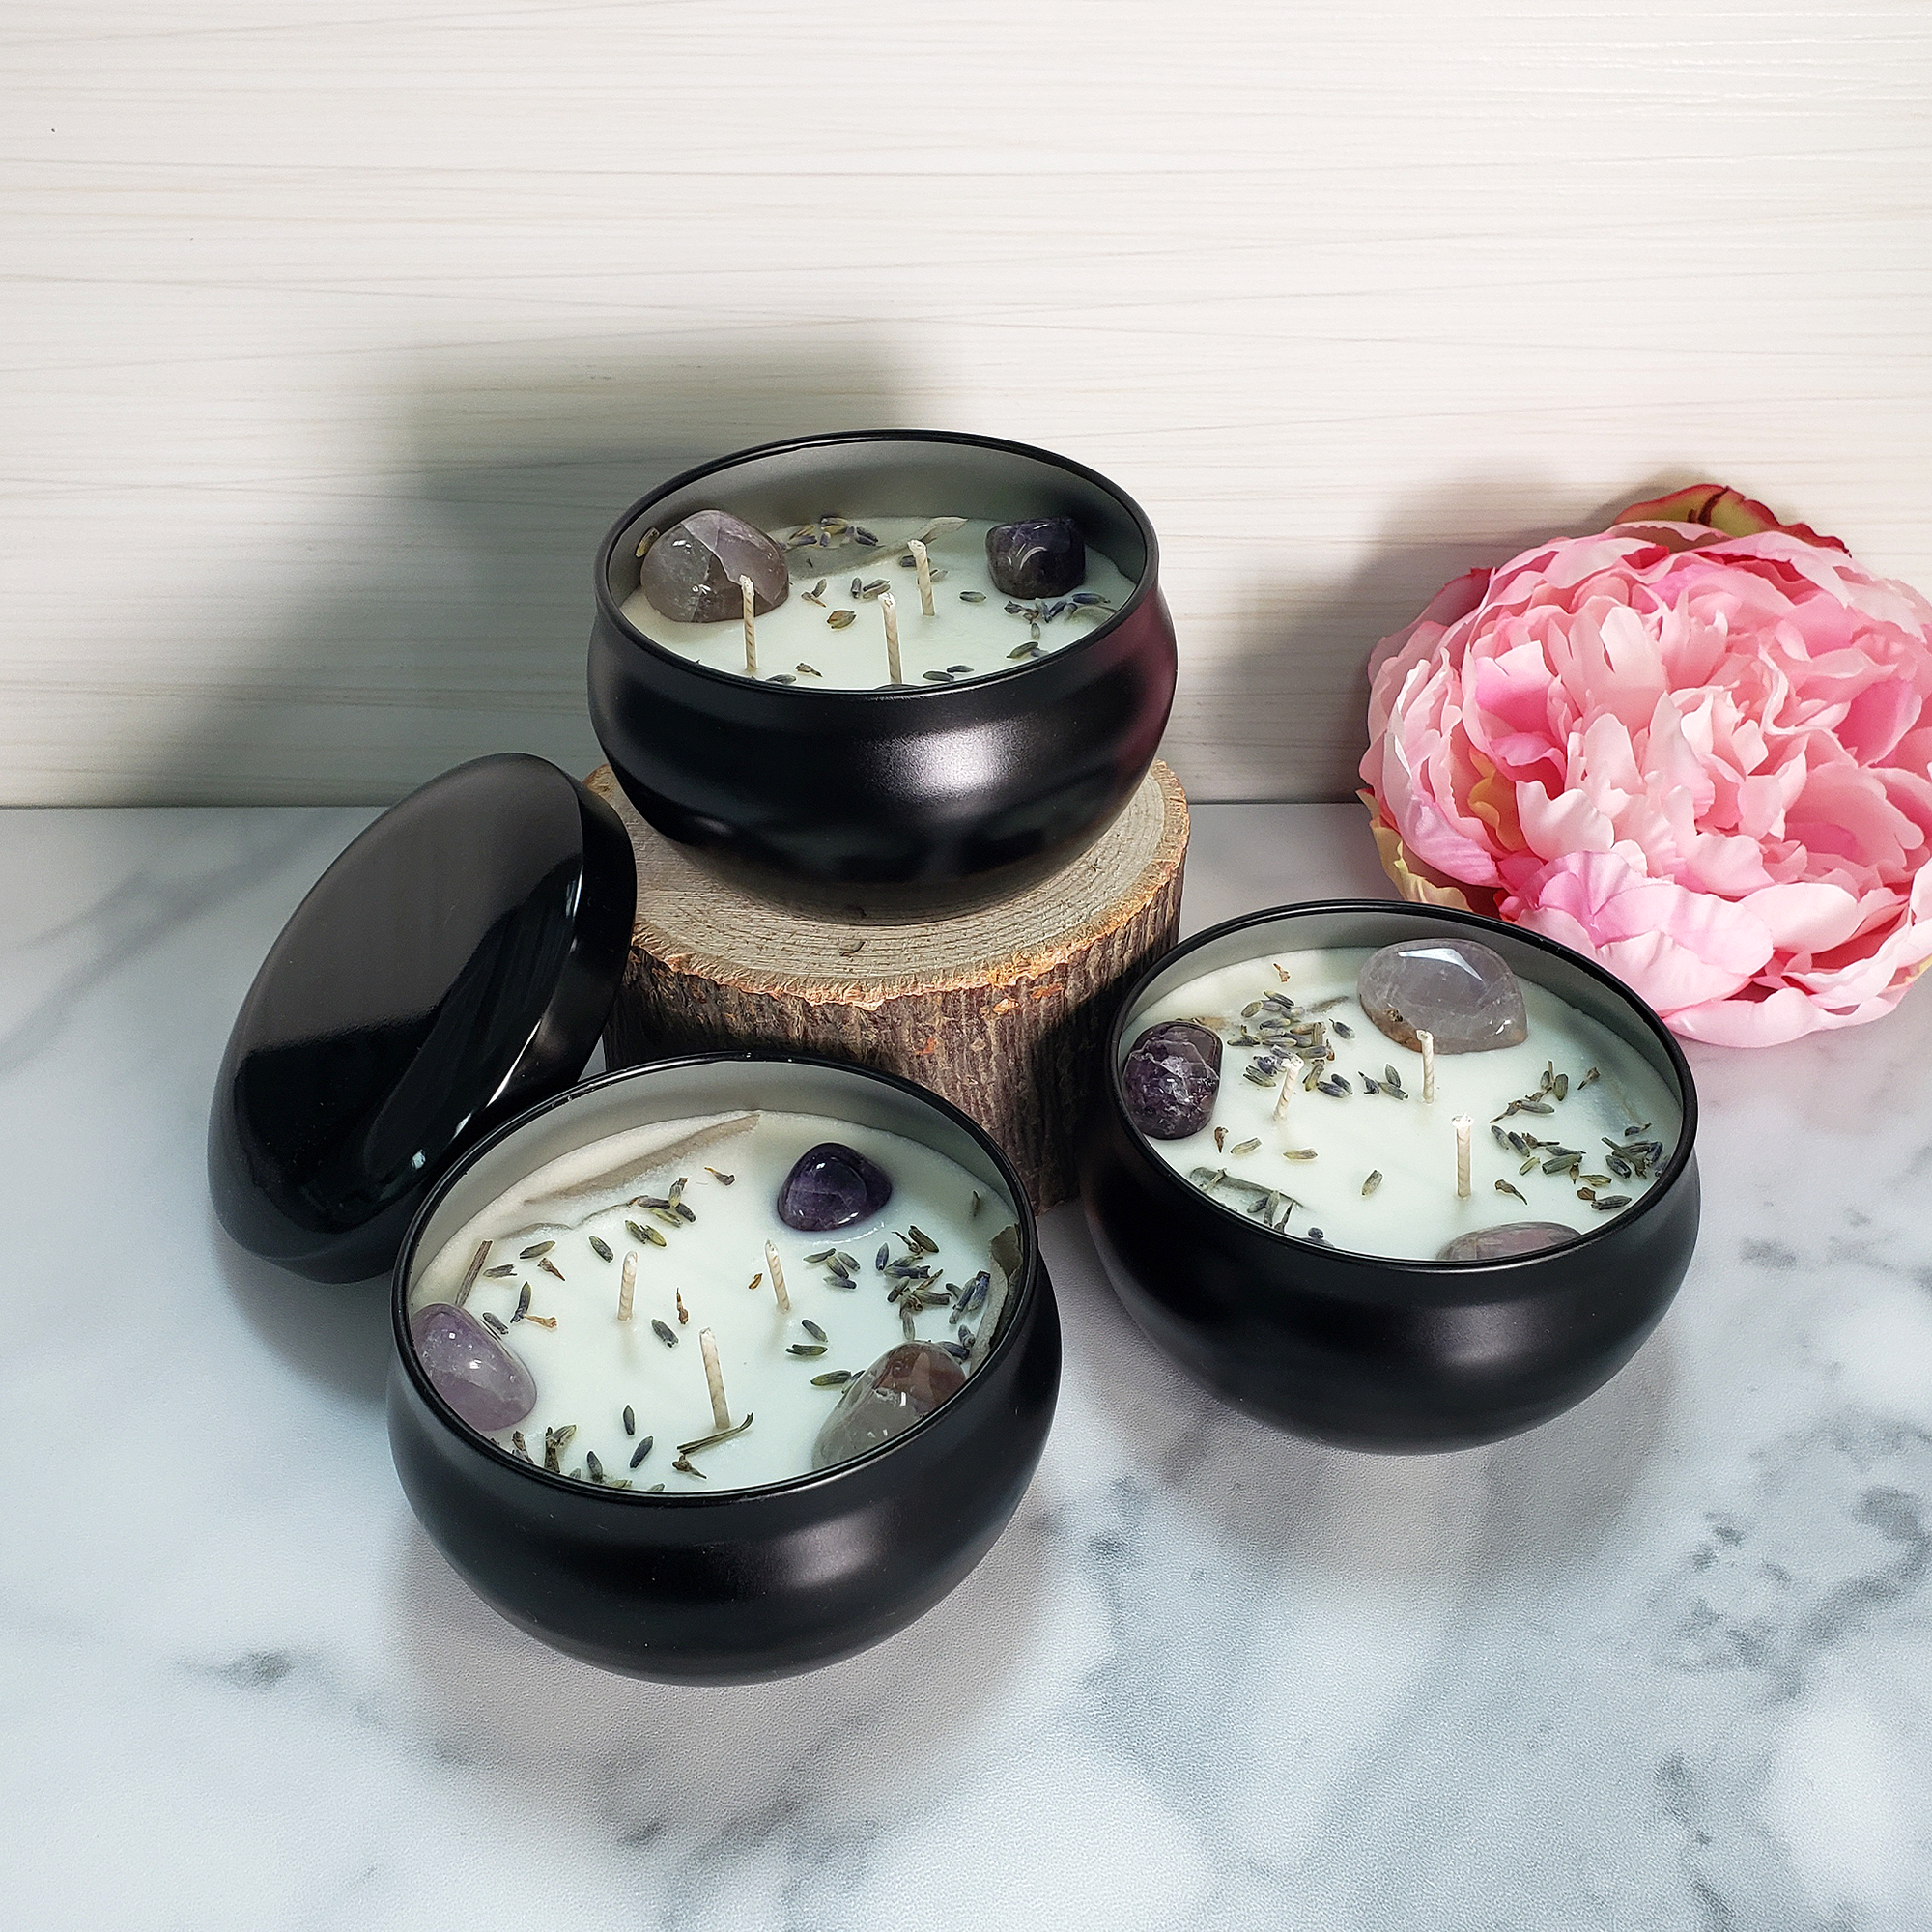 Calming Lavender - 6oz Handmade Coconut Soy Wax Scented Candle in Tin with Lid - Three Candles Displayed